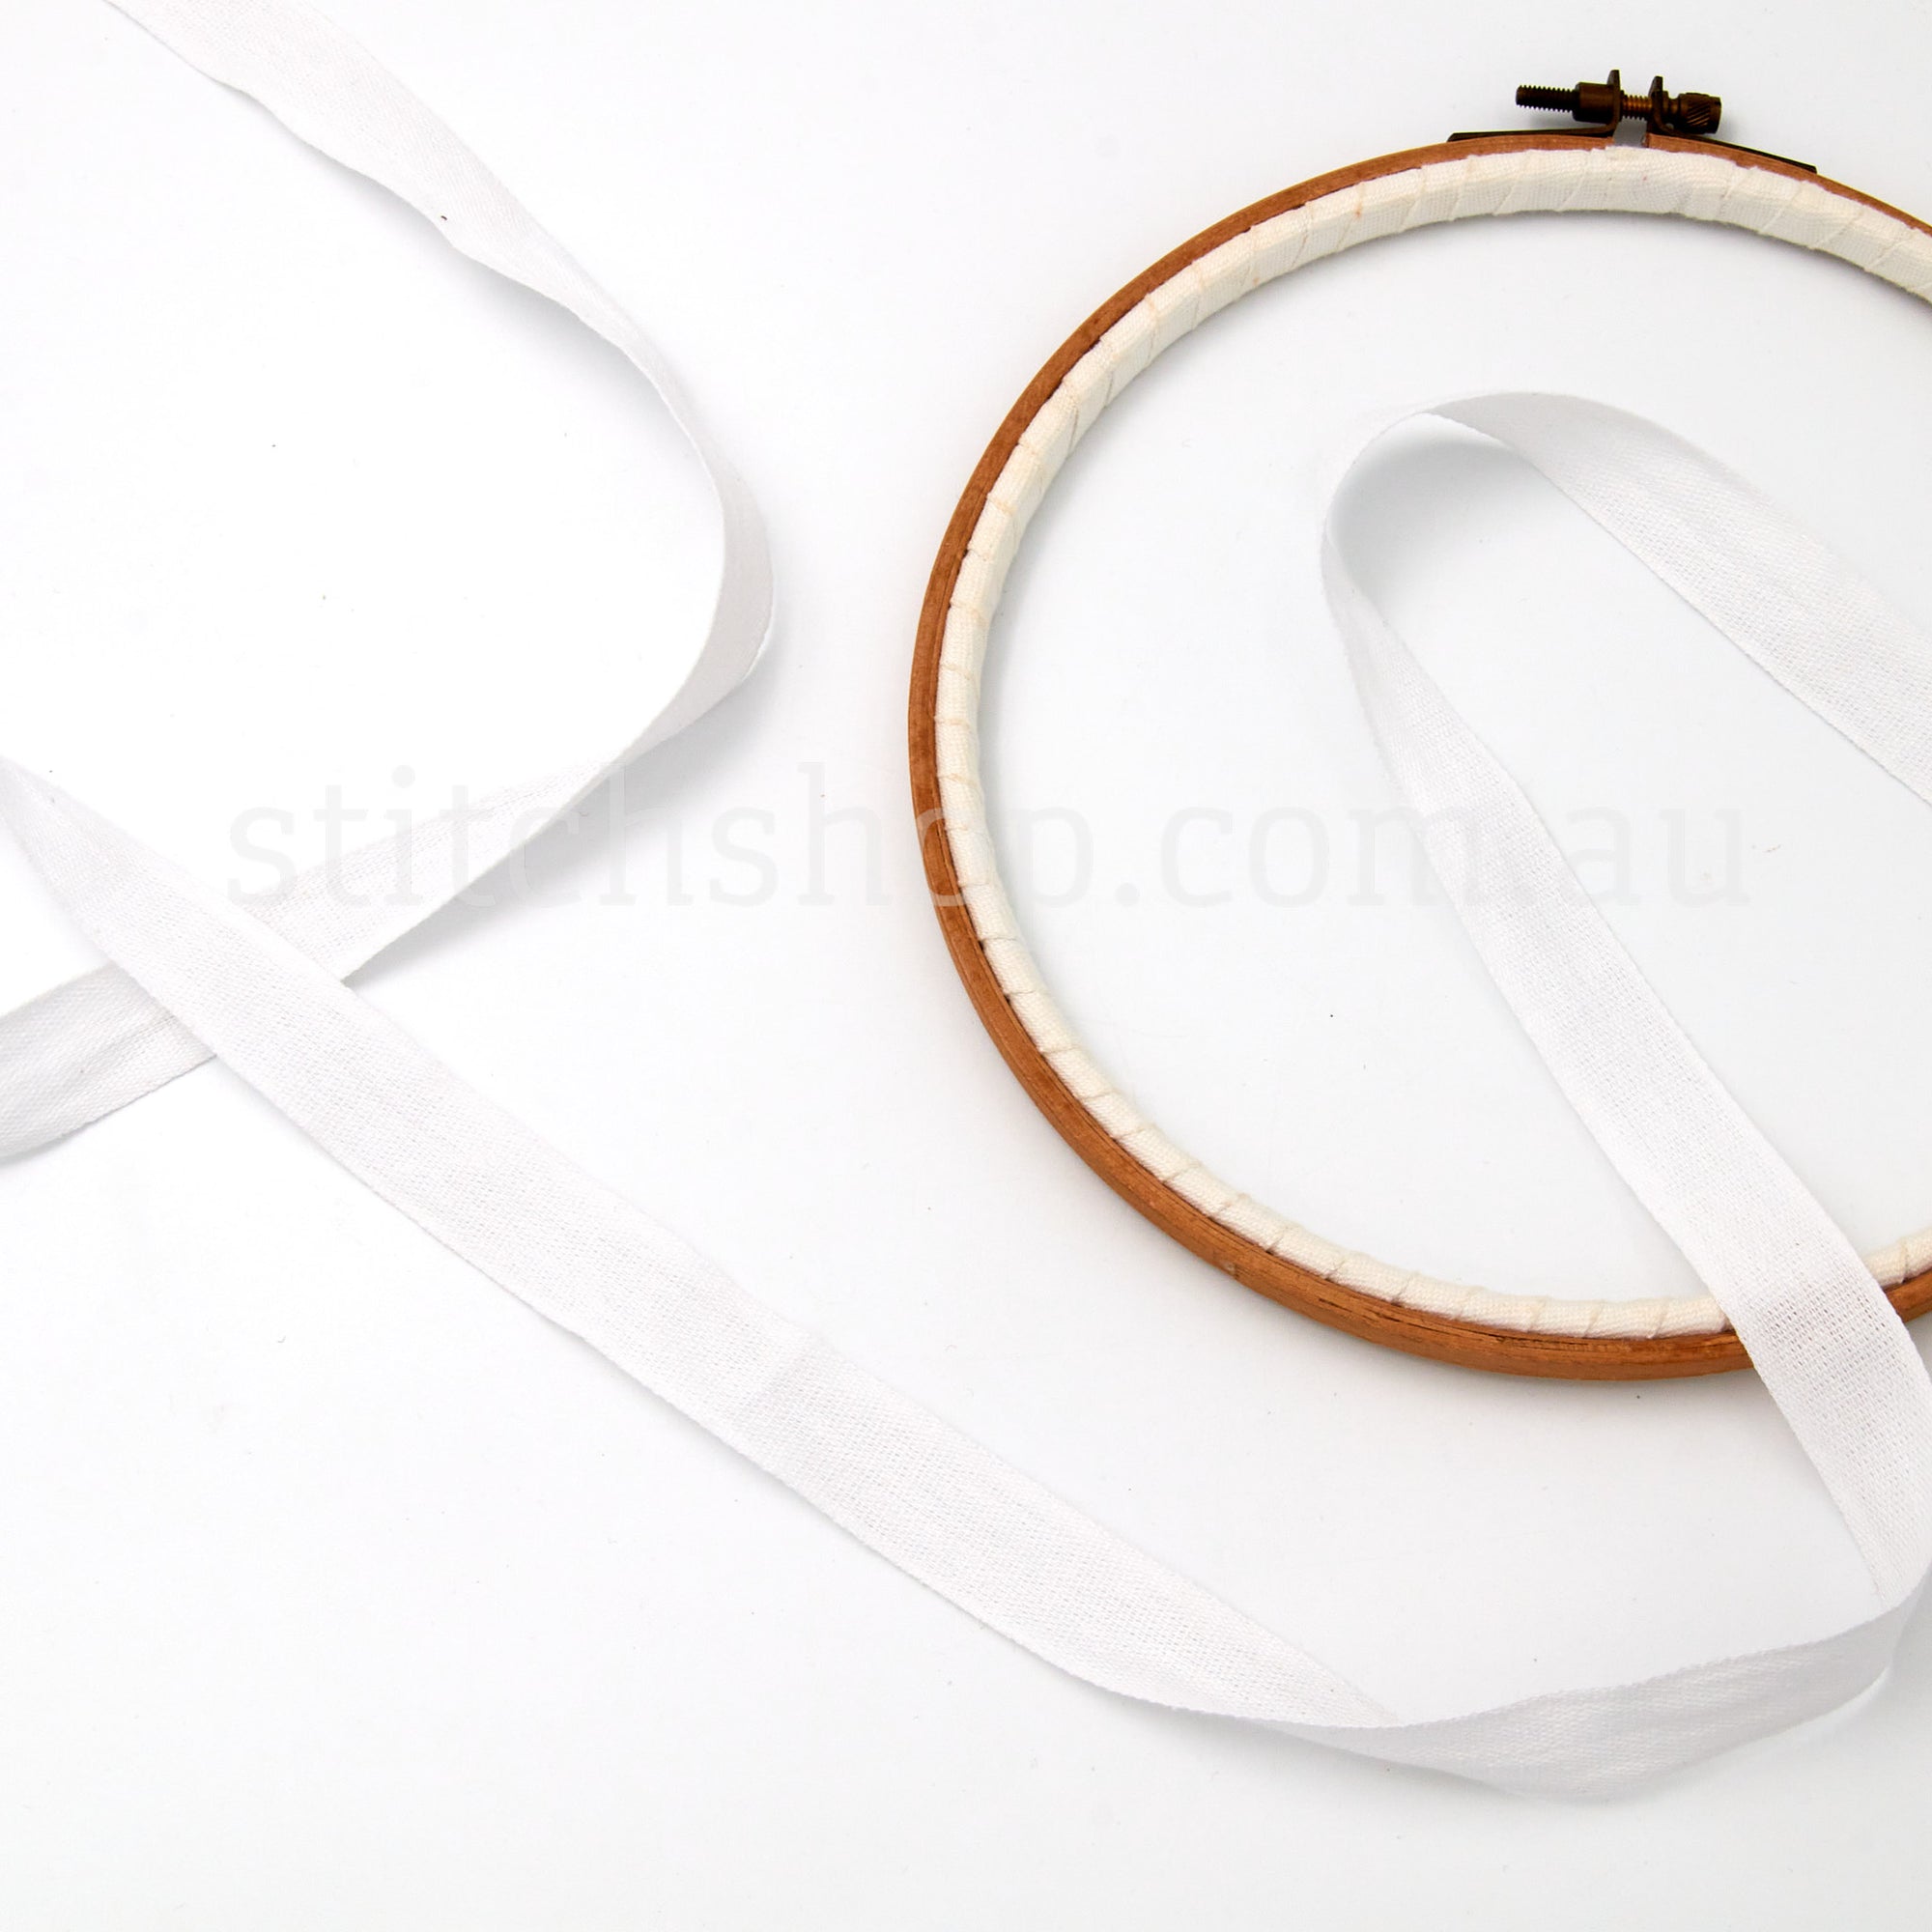 8mm SQUARE Embroidery Hoop by Klass & Gessmann – Sublime Stitching